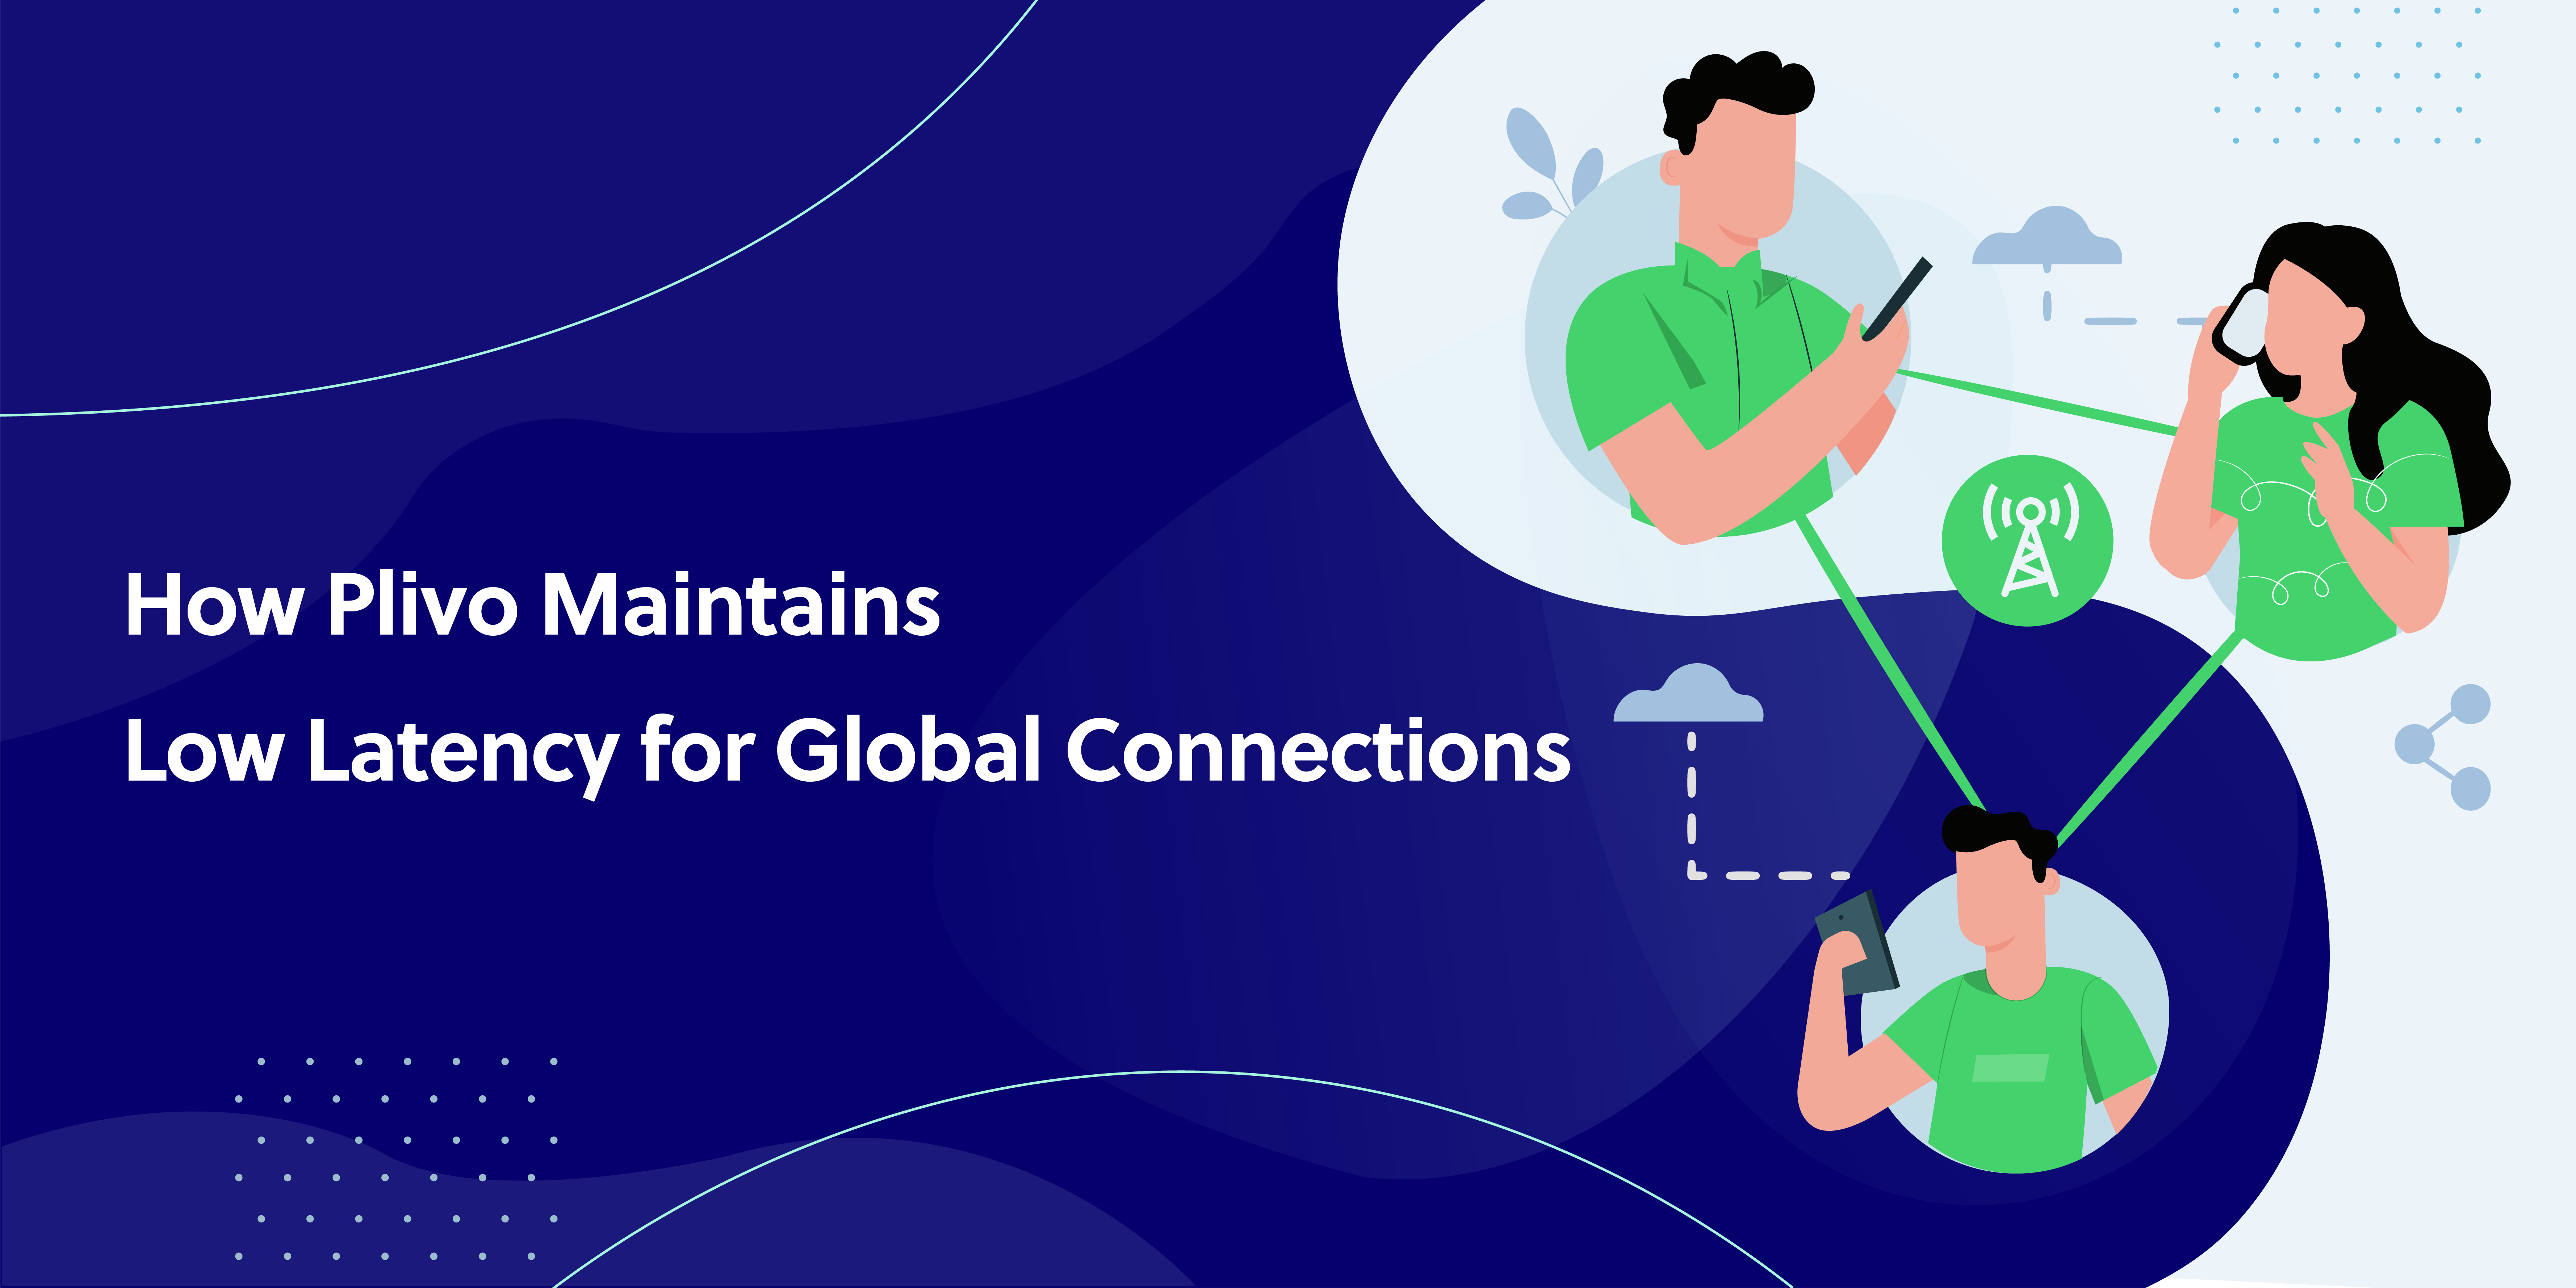 How Plivo Maintains Low Latency for Global Connections